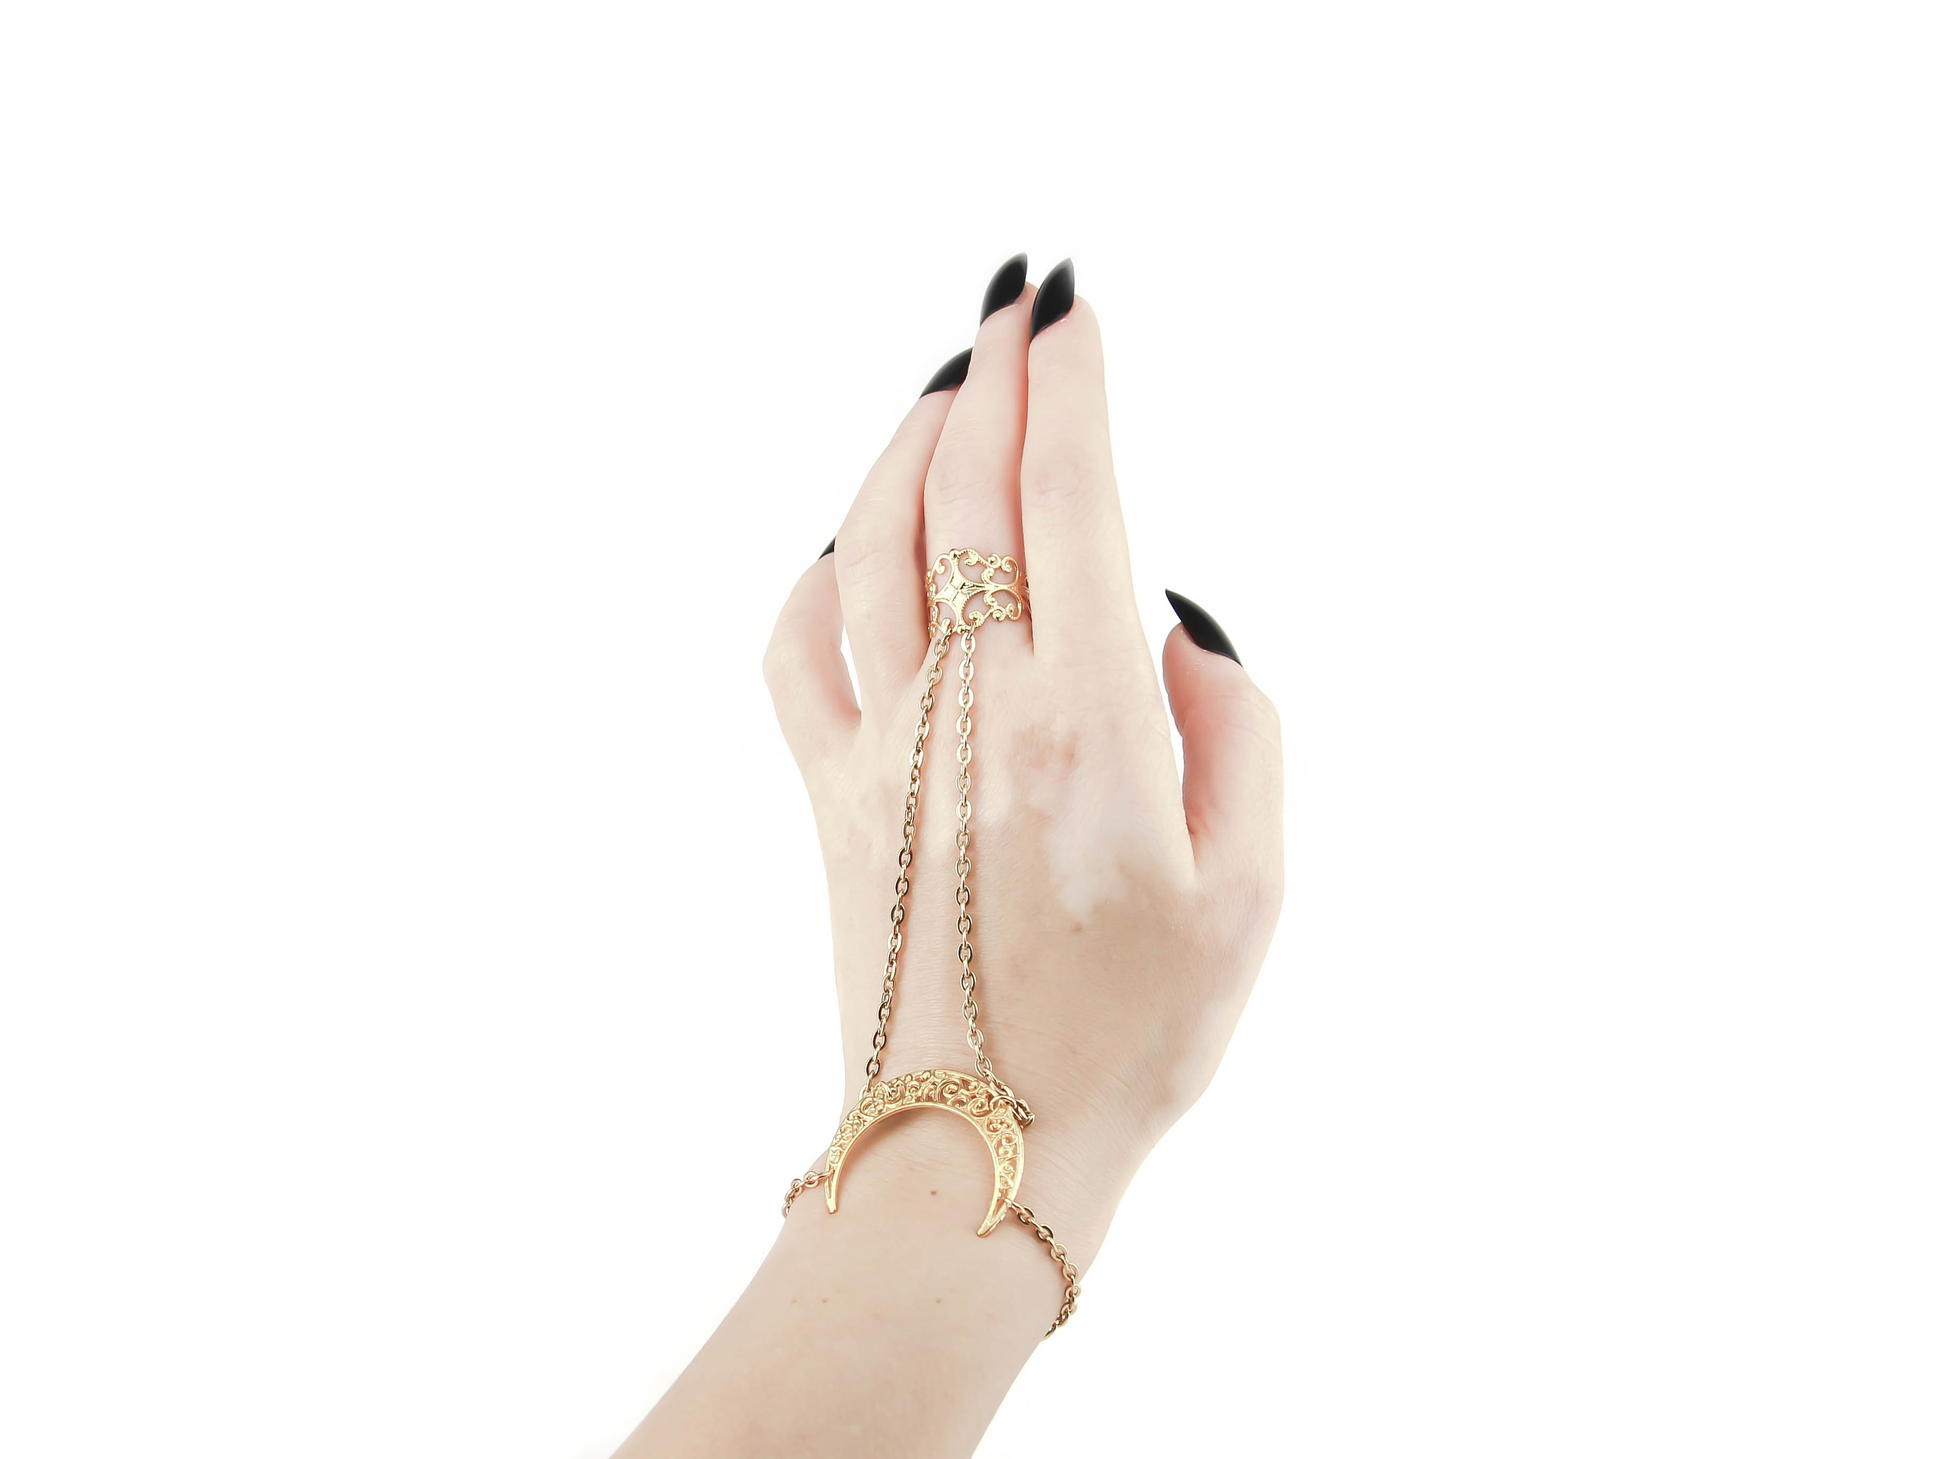 A delicate hand is raised, displaying a Myril Jewels gold hand chain with a crescent moon-shaped bracelet. This elegant piece melds neo-gothic charm with a celestial touch, suitable for anyone who cherishes dark-avantgarde aesthetics, and serves as an enchanting accessory for various occasions or as a thoughtful gift.